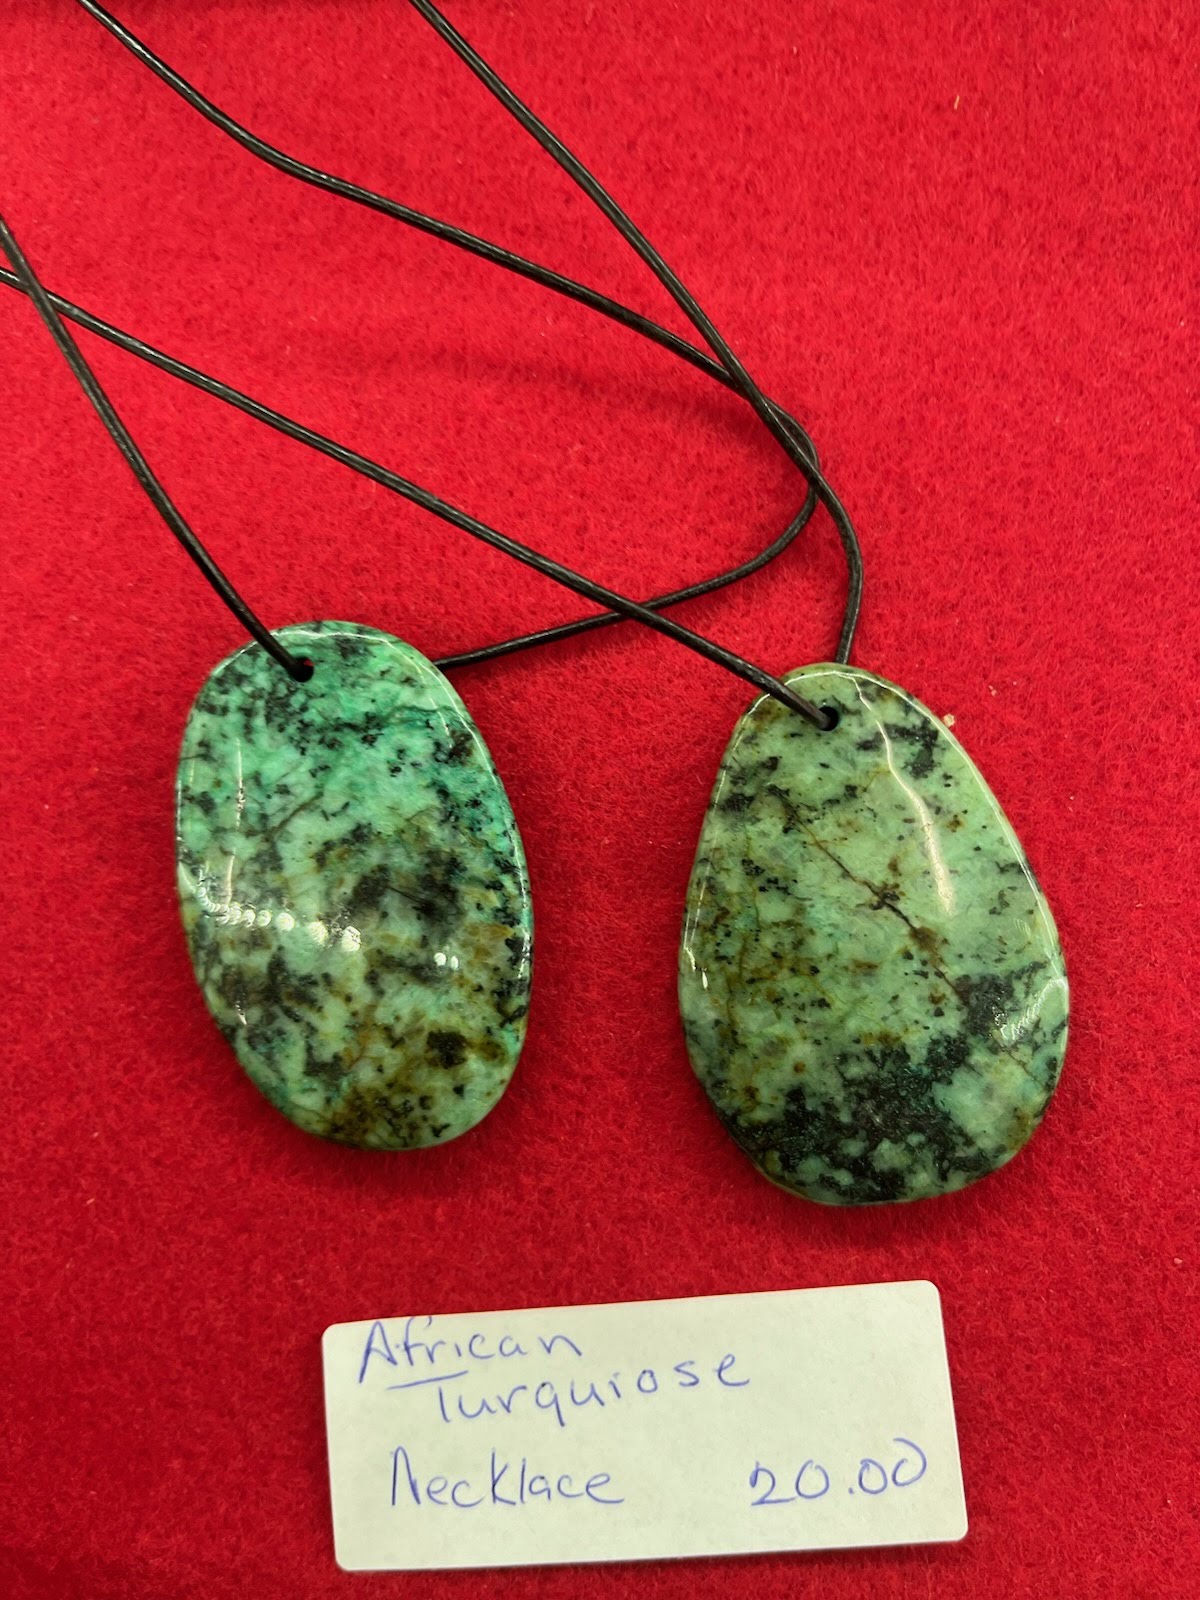 A pair of green stone pendants on a red surface